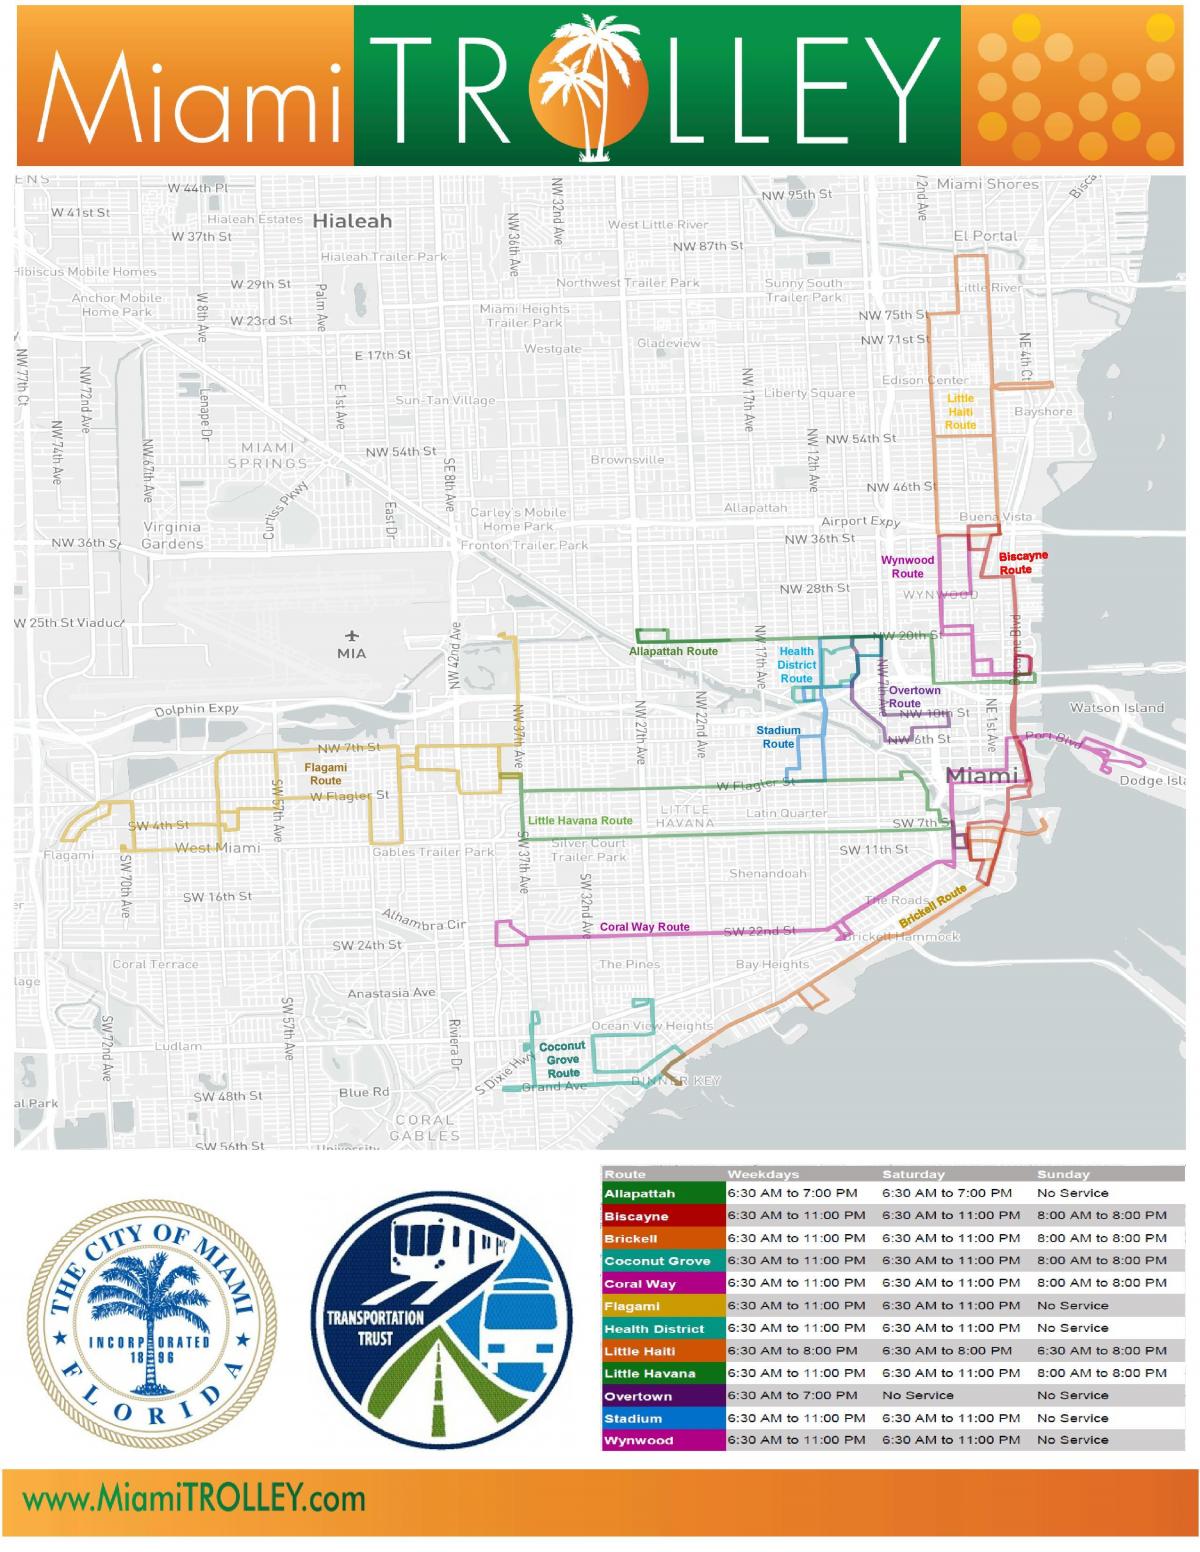 Miami trolley stations map